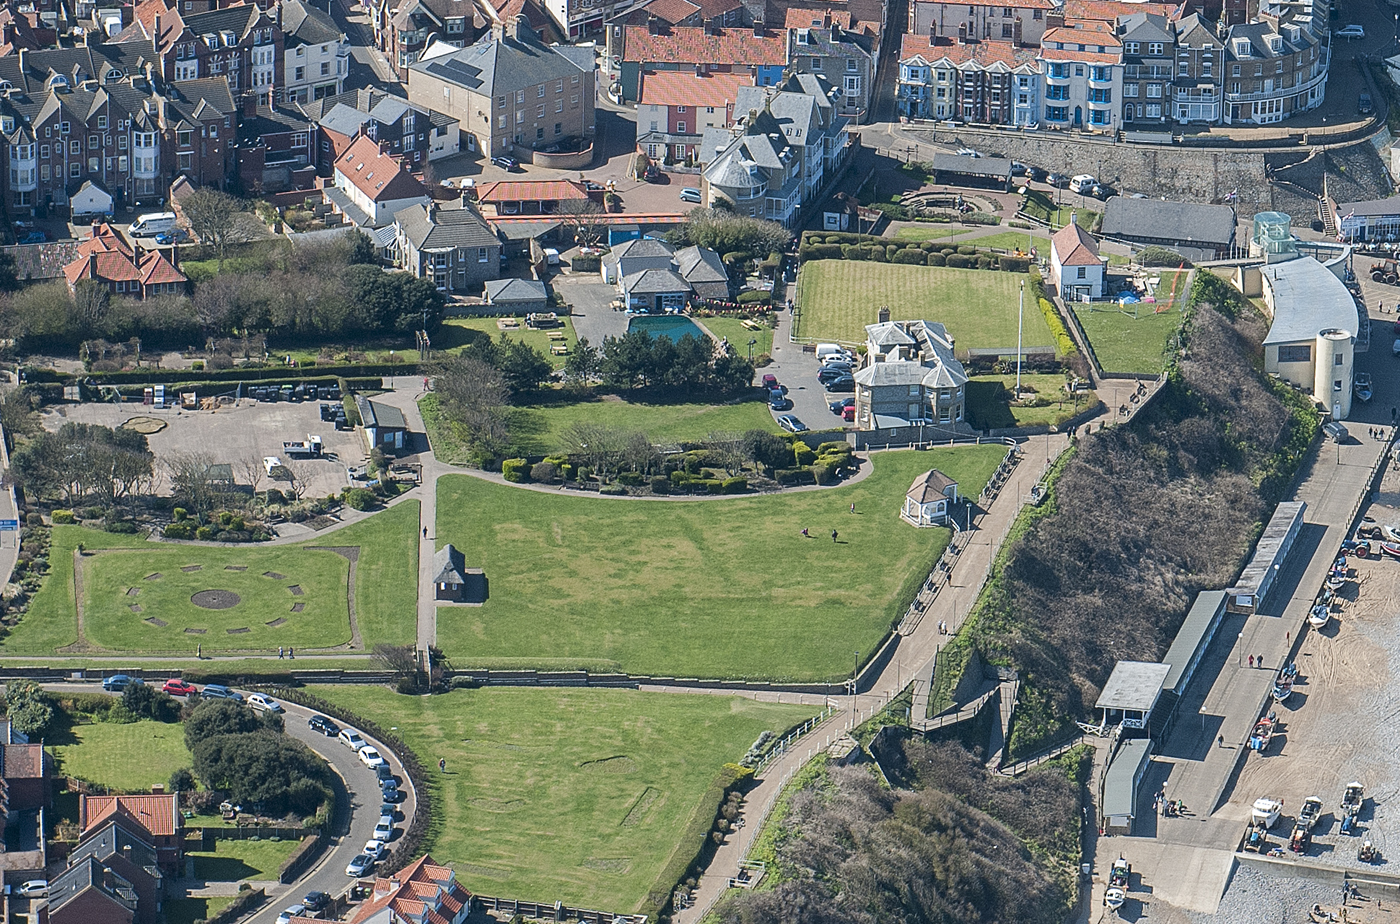 North Lodge park from above